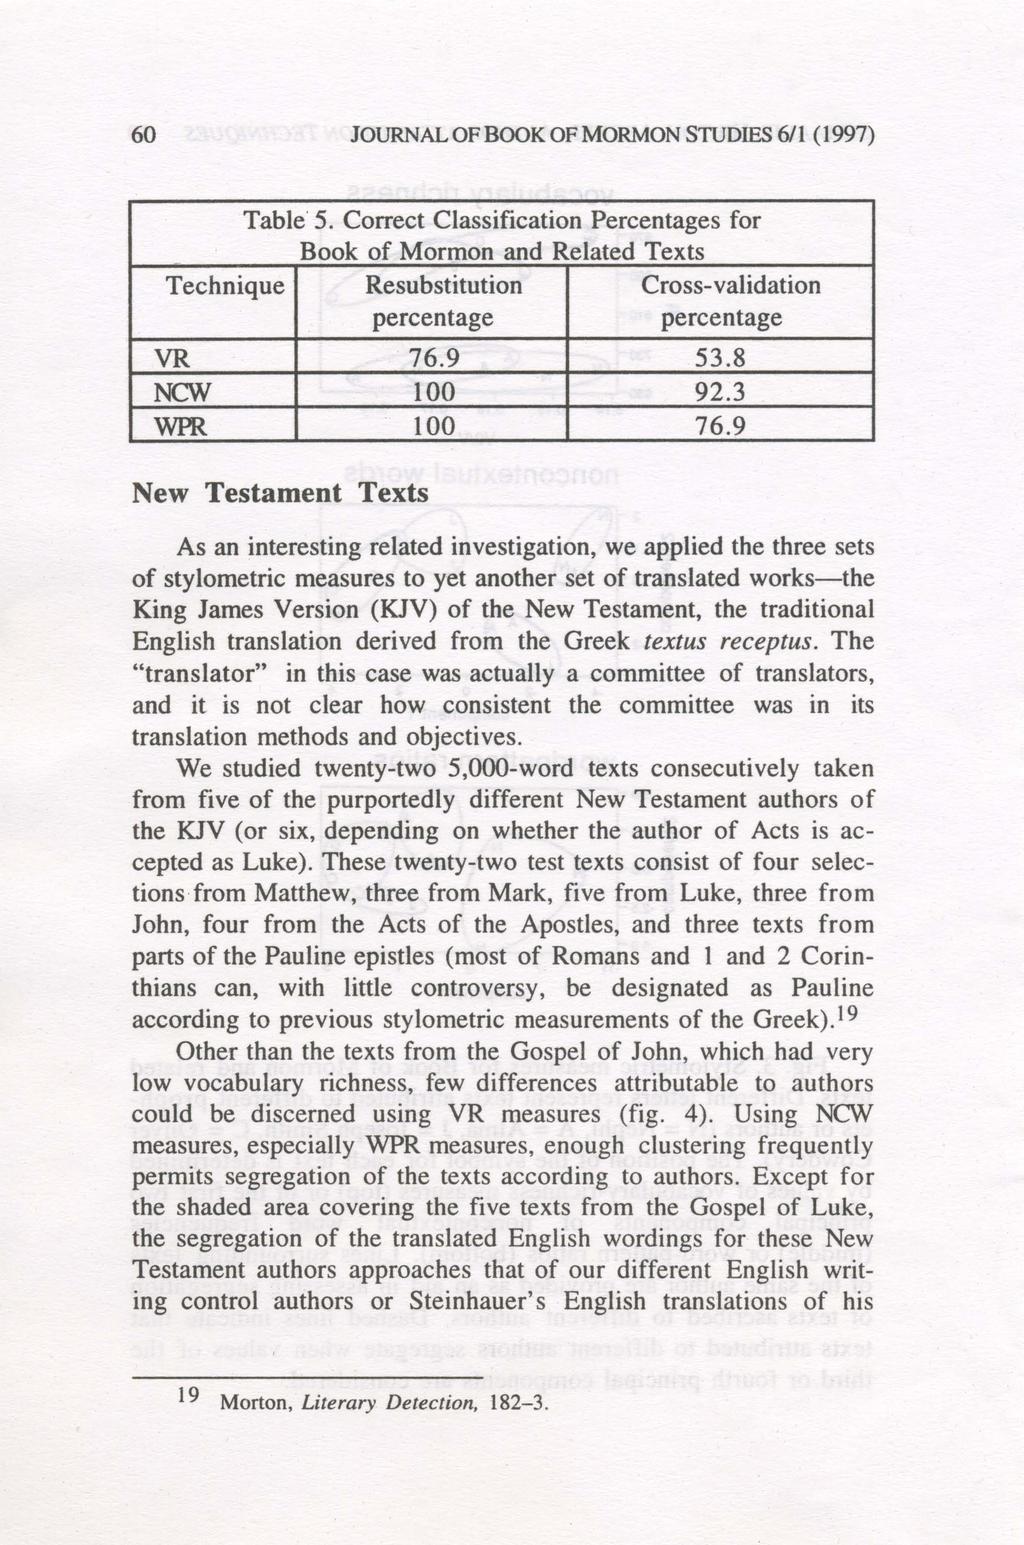 60 JOURNAL OF BOOK OF MORMON STUDIES 6/1 (1997) Table' 5. Correct Classification Percentages for Book of Mormon and Related Texts Technique Resubstitution Cross-validation percentage percentage VR 76.